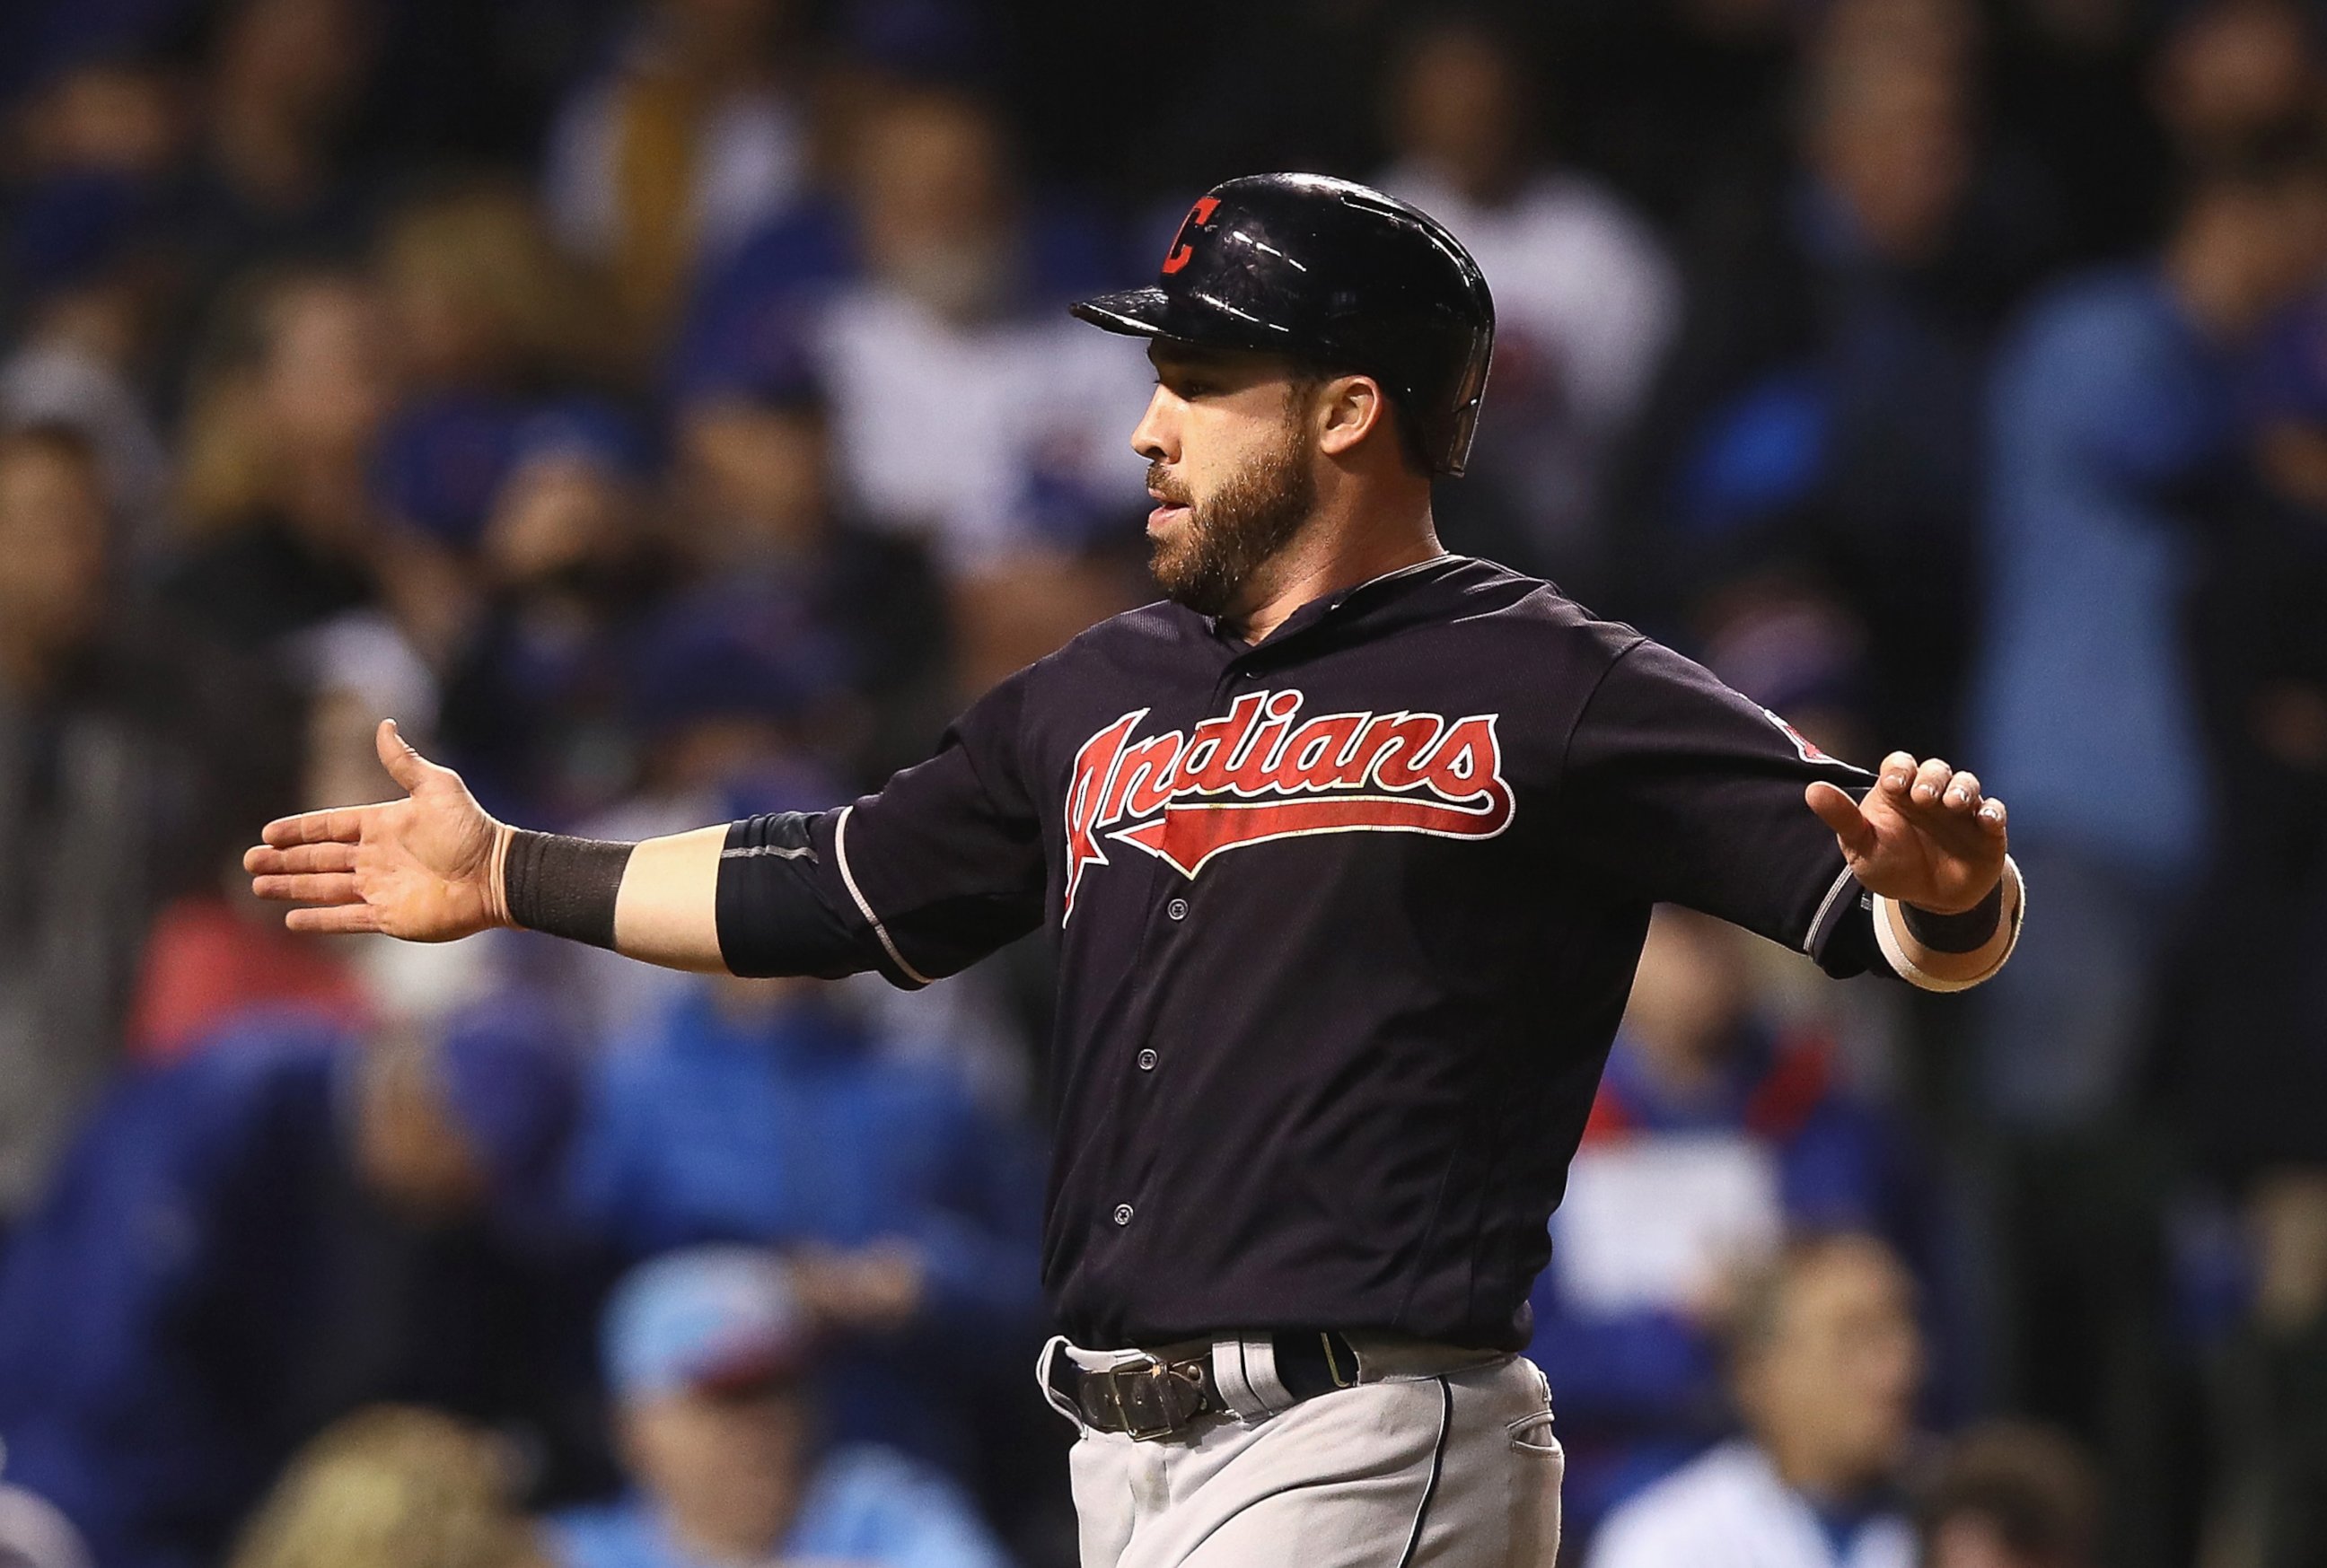 PHOTO: Jason Kipnis #22 of the Cleveland Indians celebrates after scoring a run in the third inning against the Chicago Cubs in Game Four of the 2016 World Series at Wrigley Field, Oct. 29, 2016 in Chicago. 